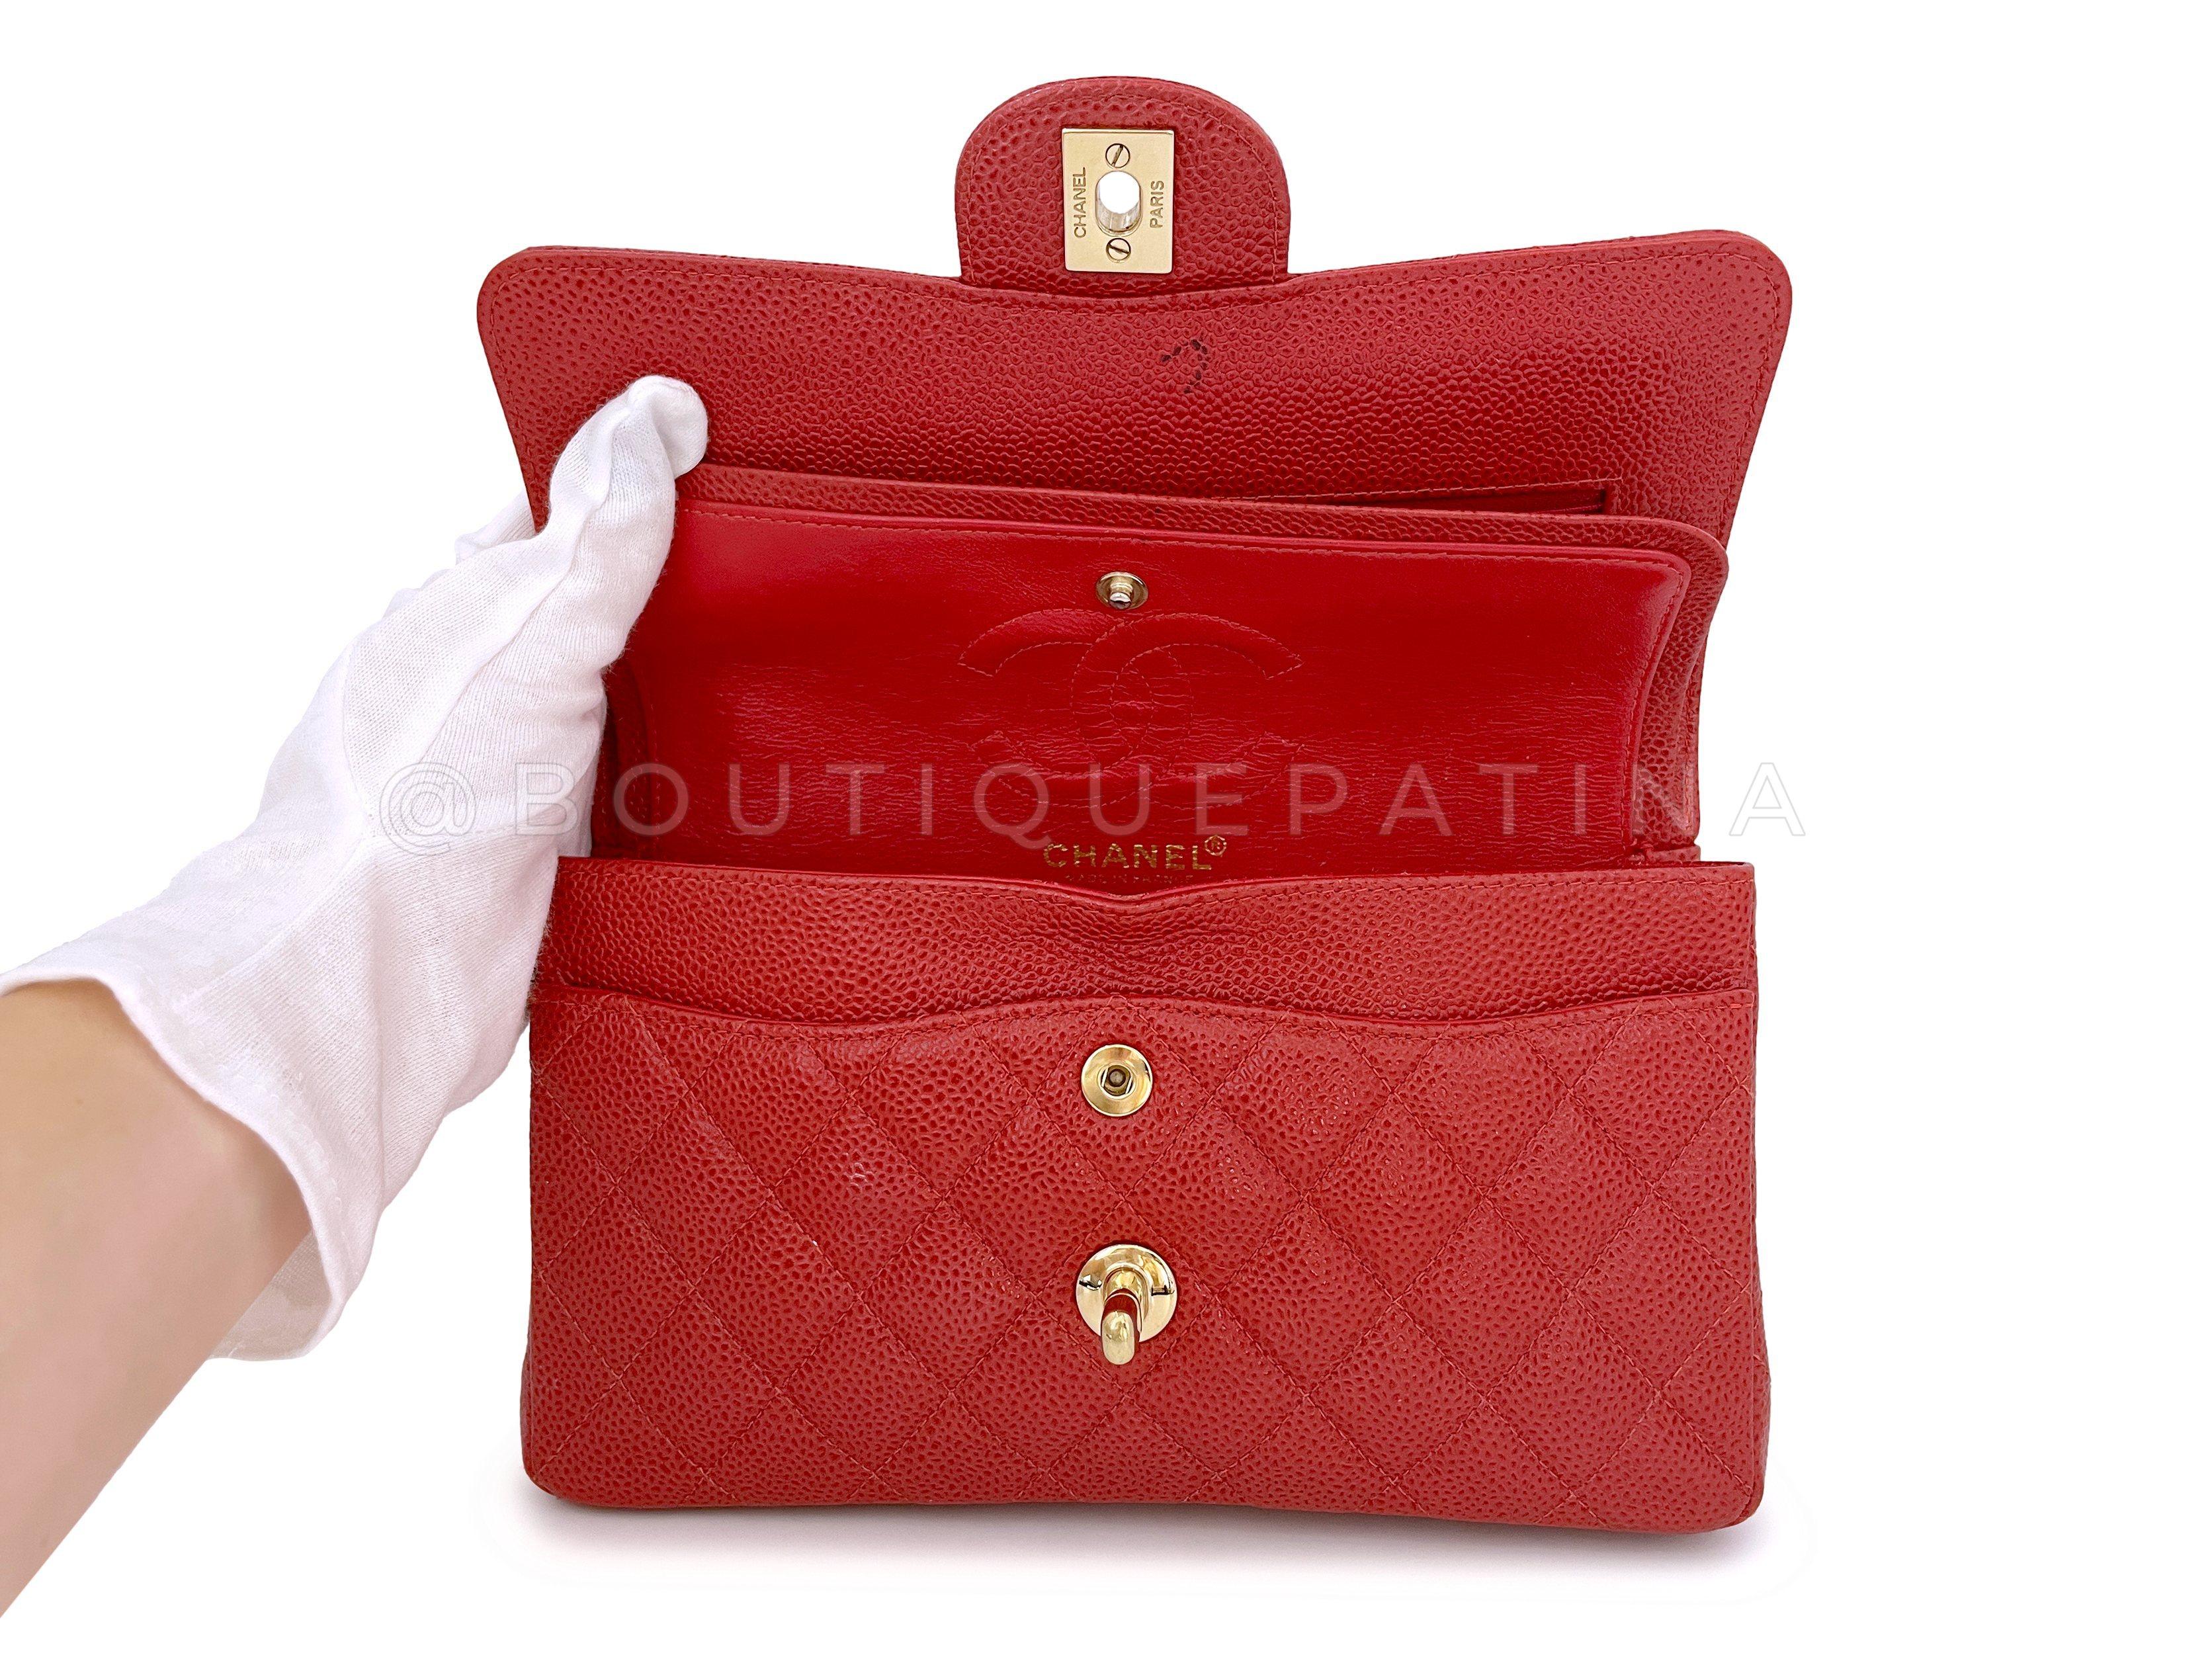 Chanel 2002 Vintage Red Caviar Small Classic Double Flap Bag 24k GHW 66396 For Sale 2